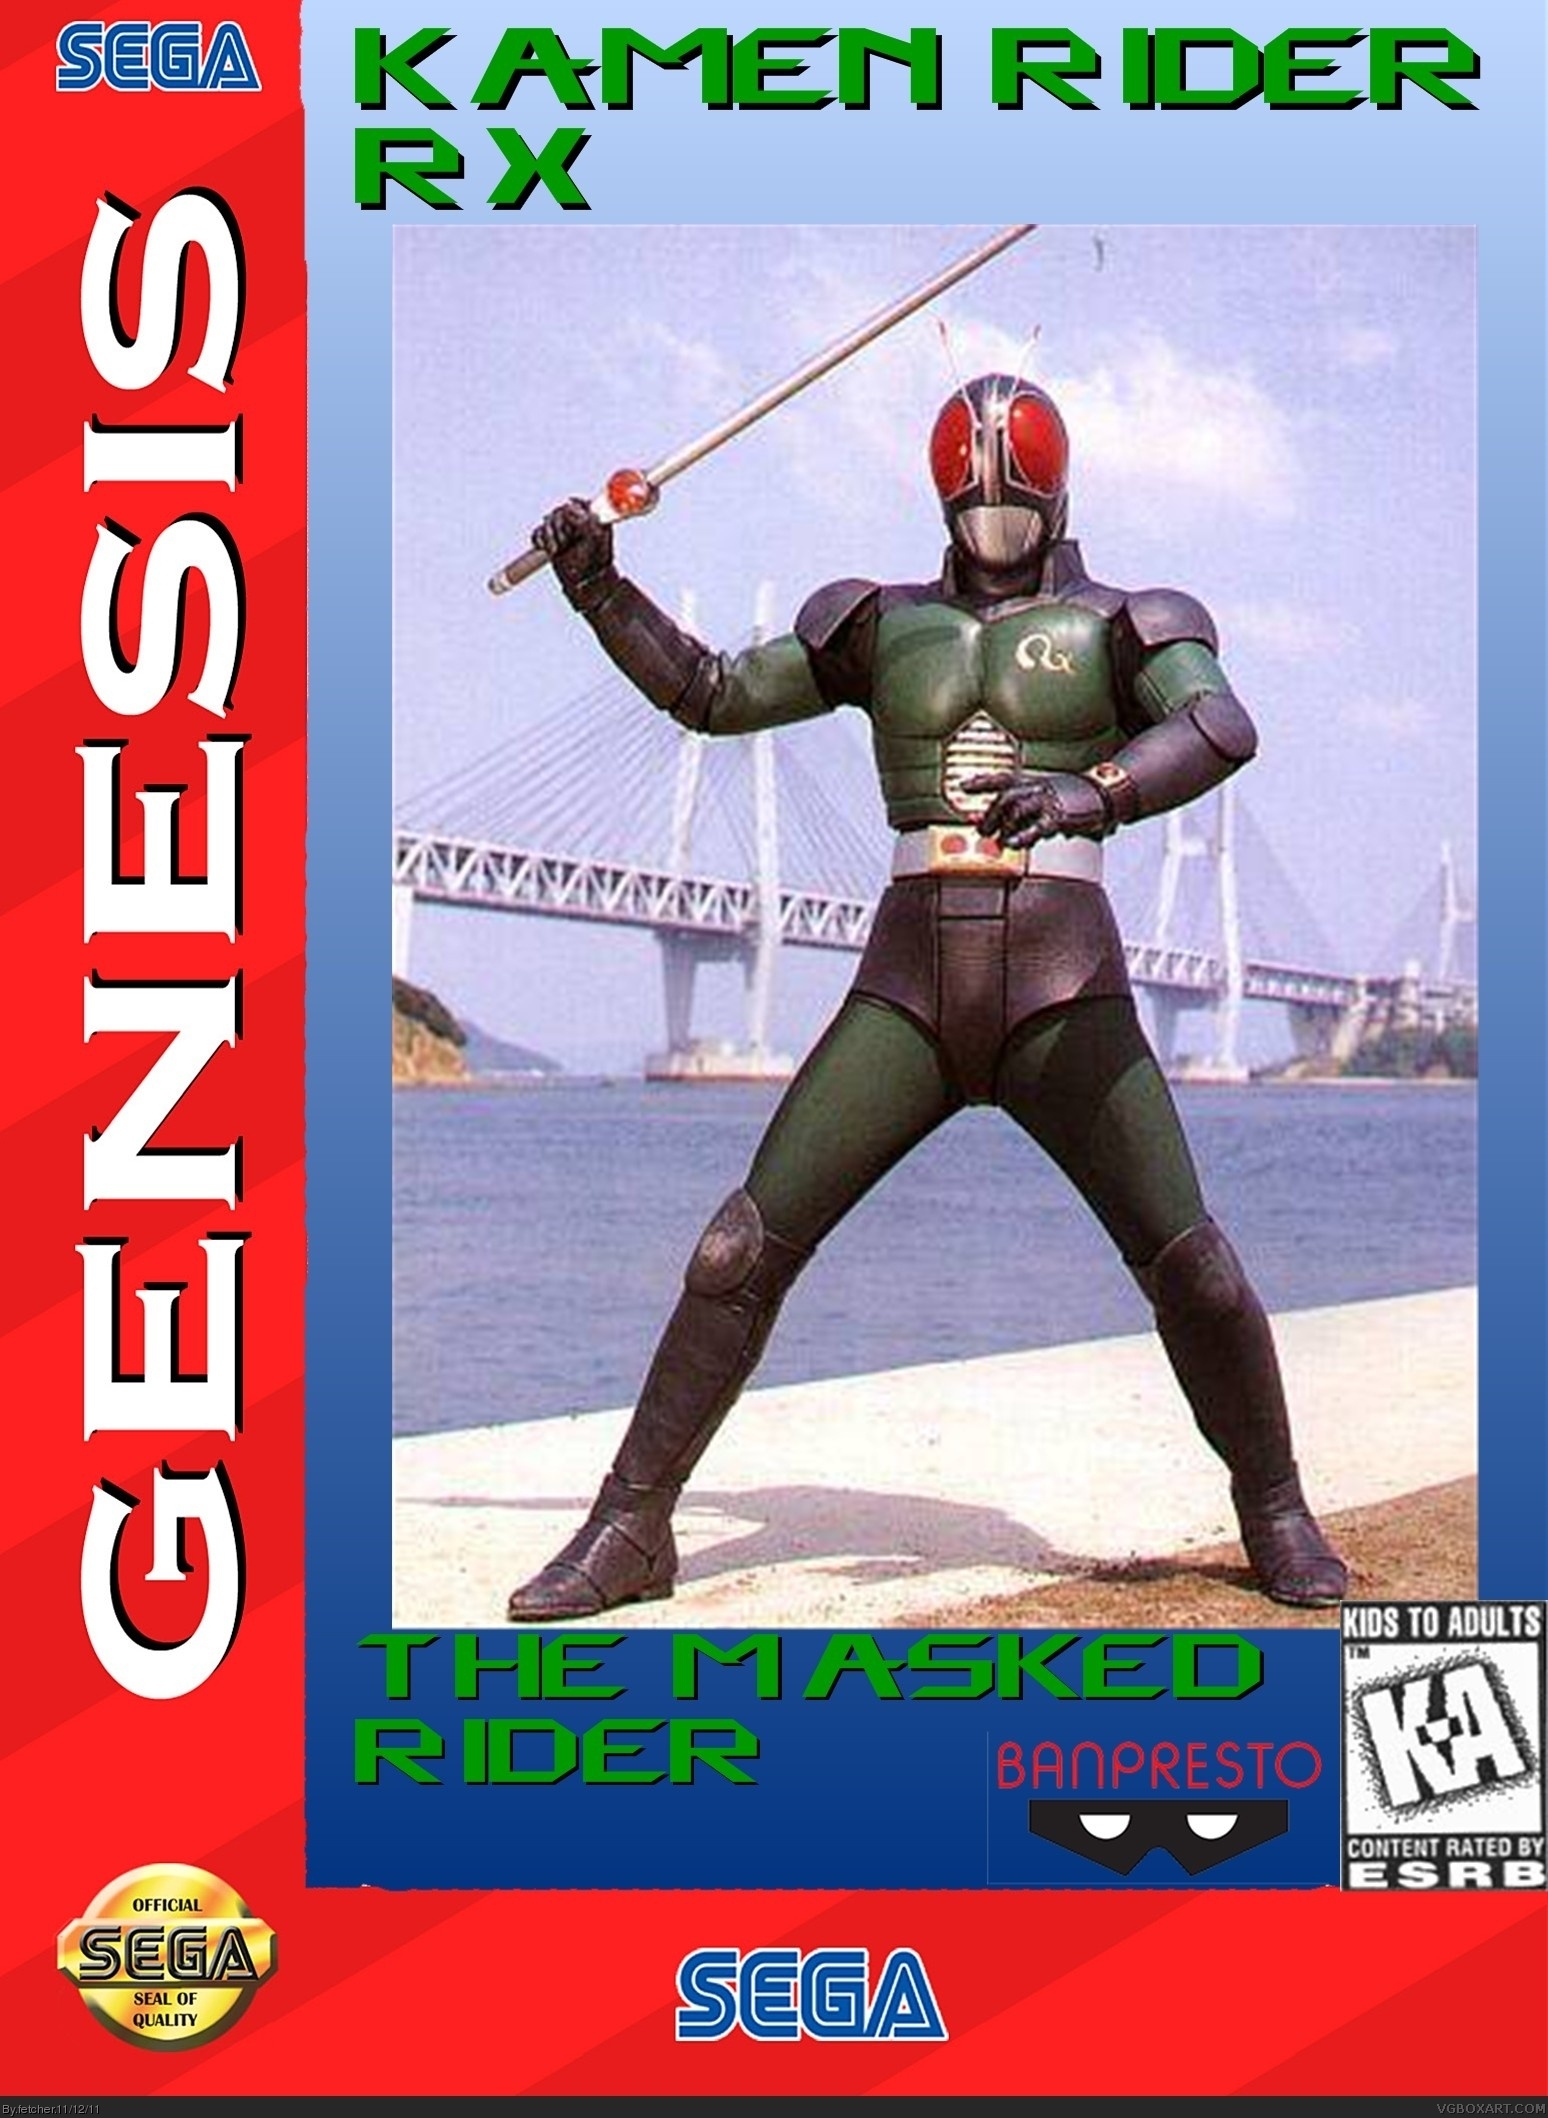 Kamen Rider RX: The Masked Rider box cover